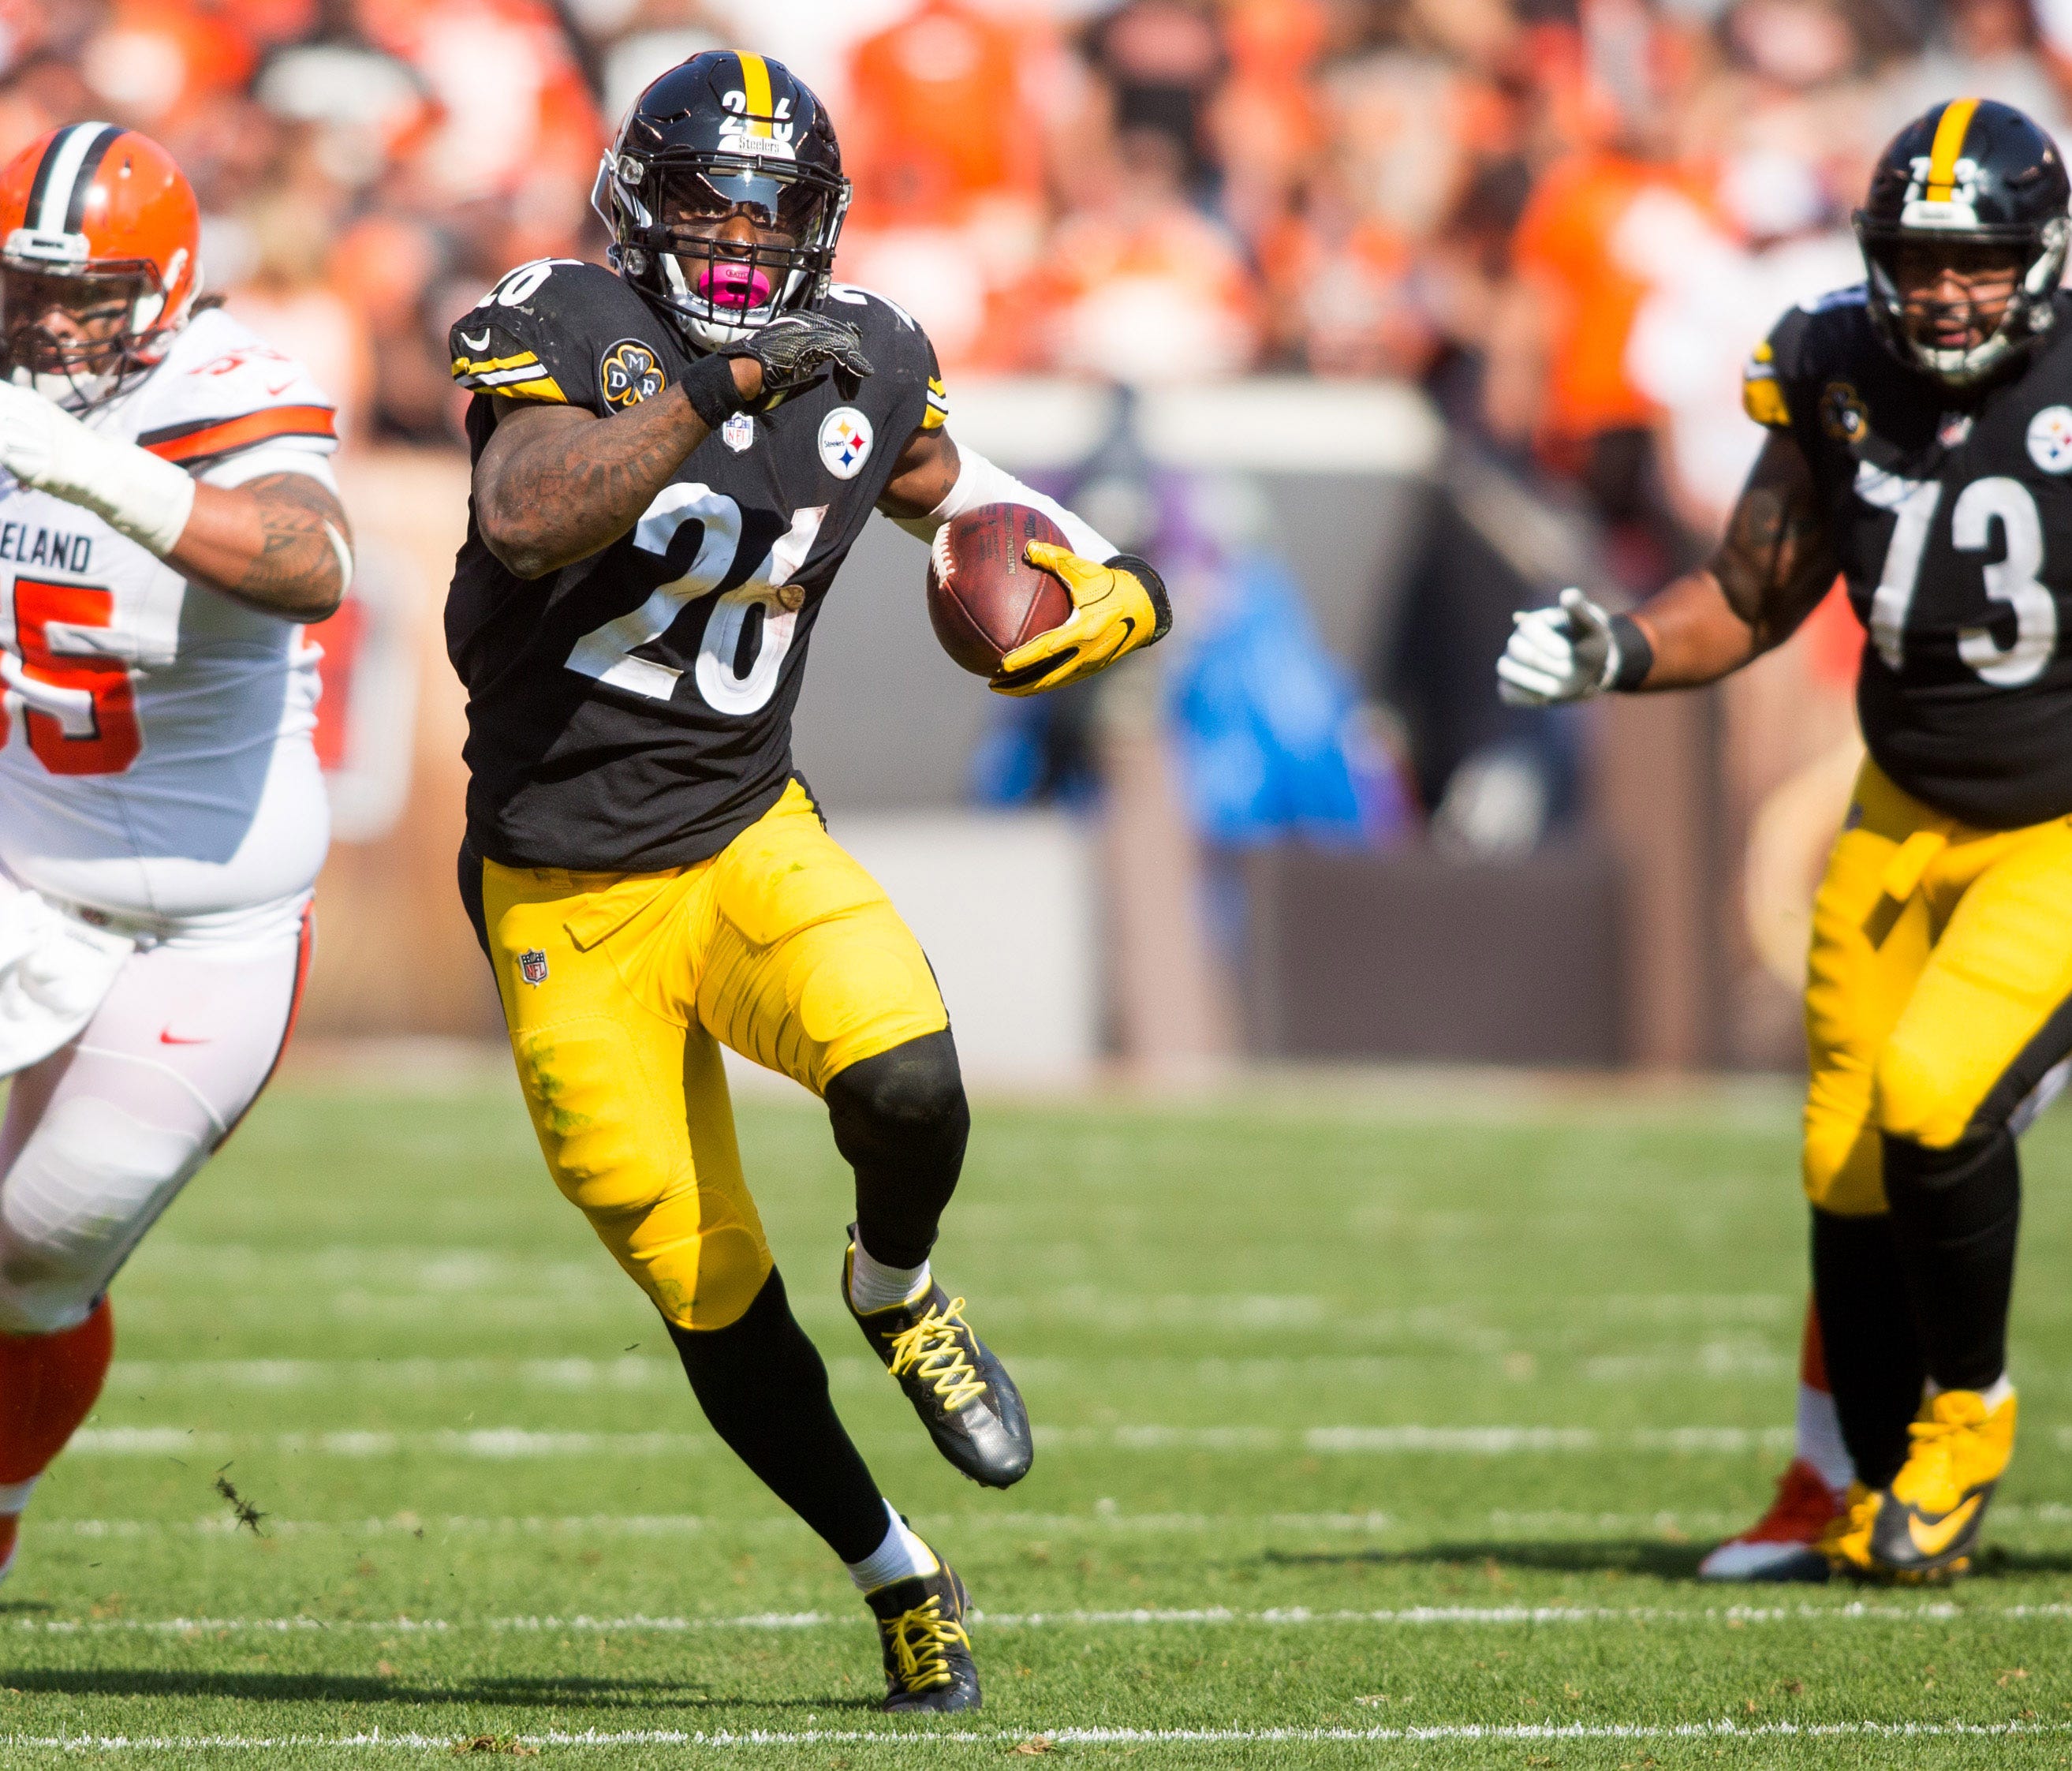 Pittsburgh Steelers running back Le'Veon Bell (26) runs the ball against the Cleveland Browns during the during the fourth quarter at FirstEnergy Stadium.